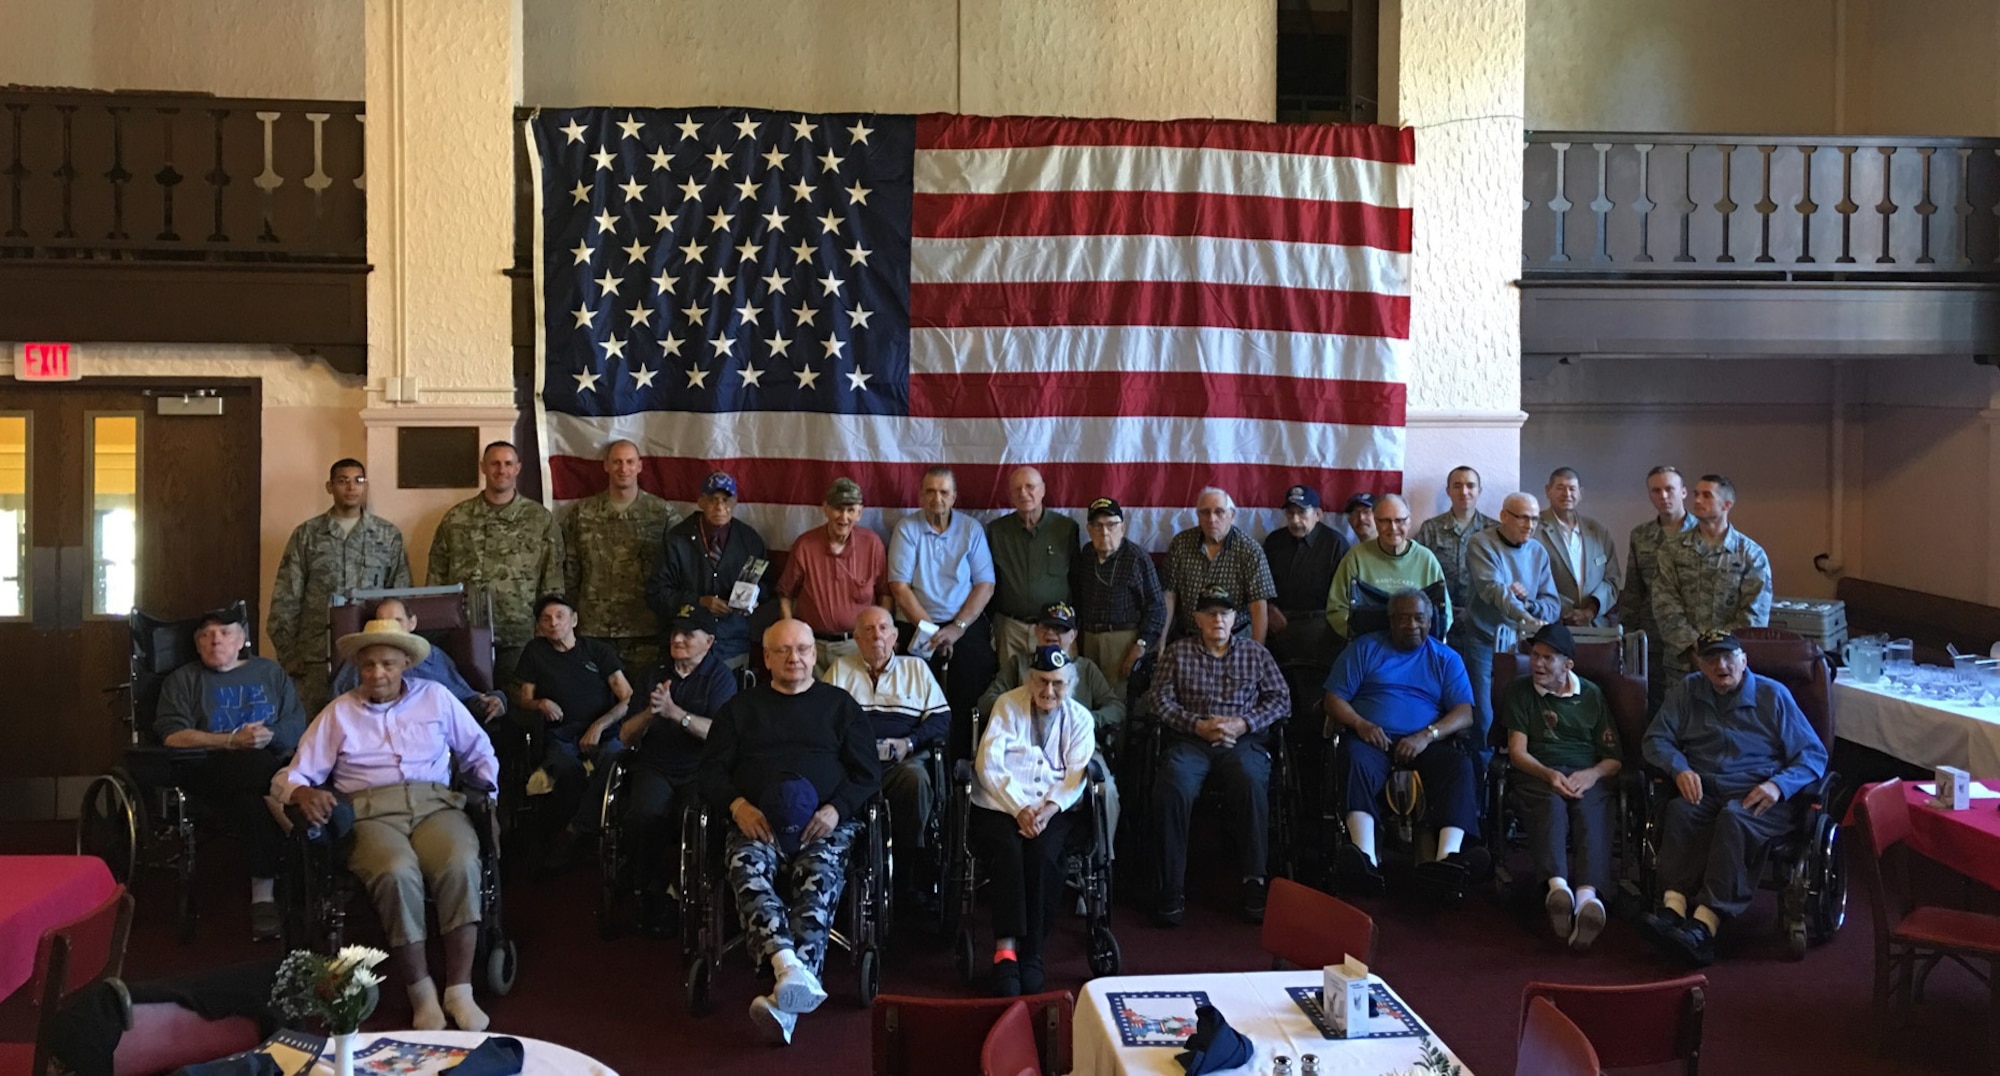 193rd Special Operations Security Forces Squadron Airmen pose with Veterans at the Middletown Home, Middletown, Pennsylvania, Oct. 17, 2017. This was the third year that 193rd SOSFS Airmen visited the home for a Veterans lunch. (U.S. Air National Guard Courtesy Photo/Released)